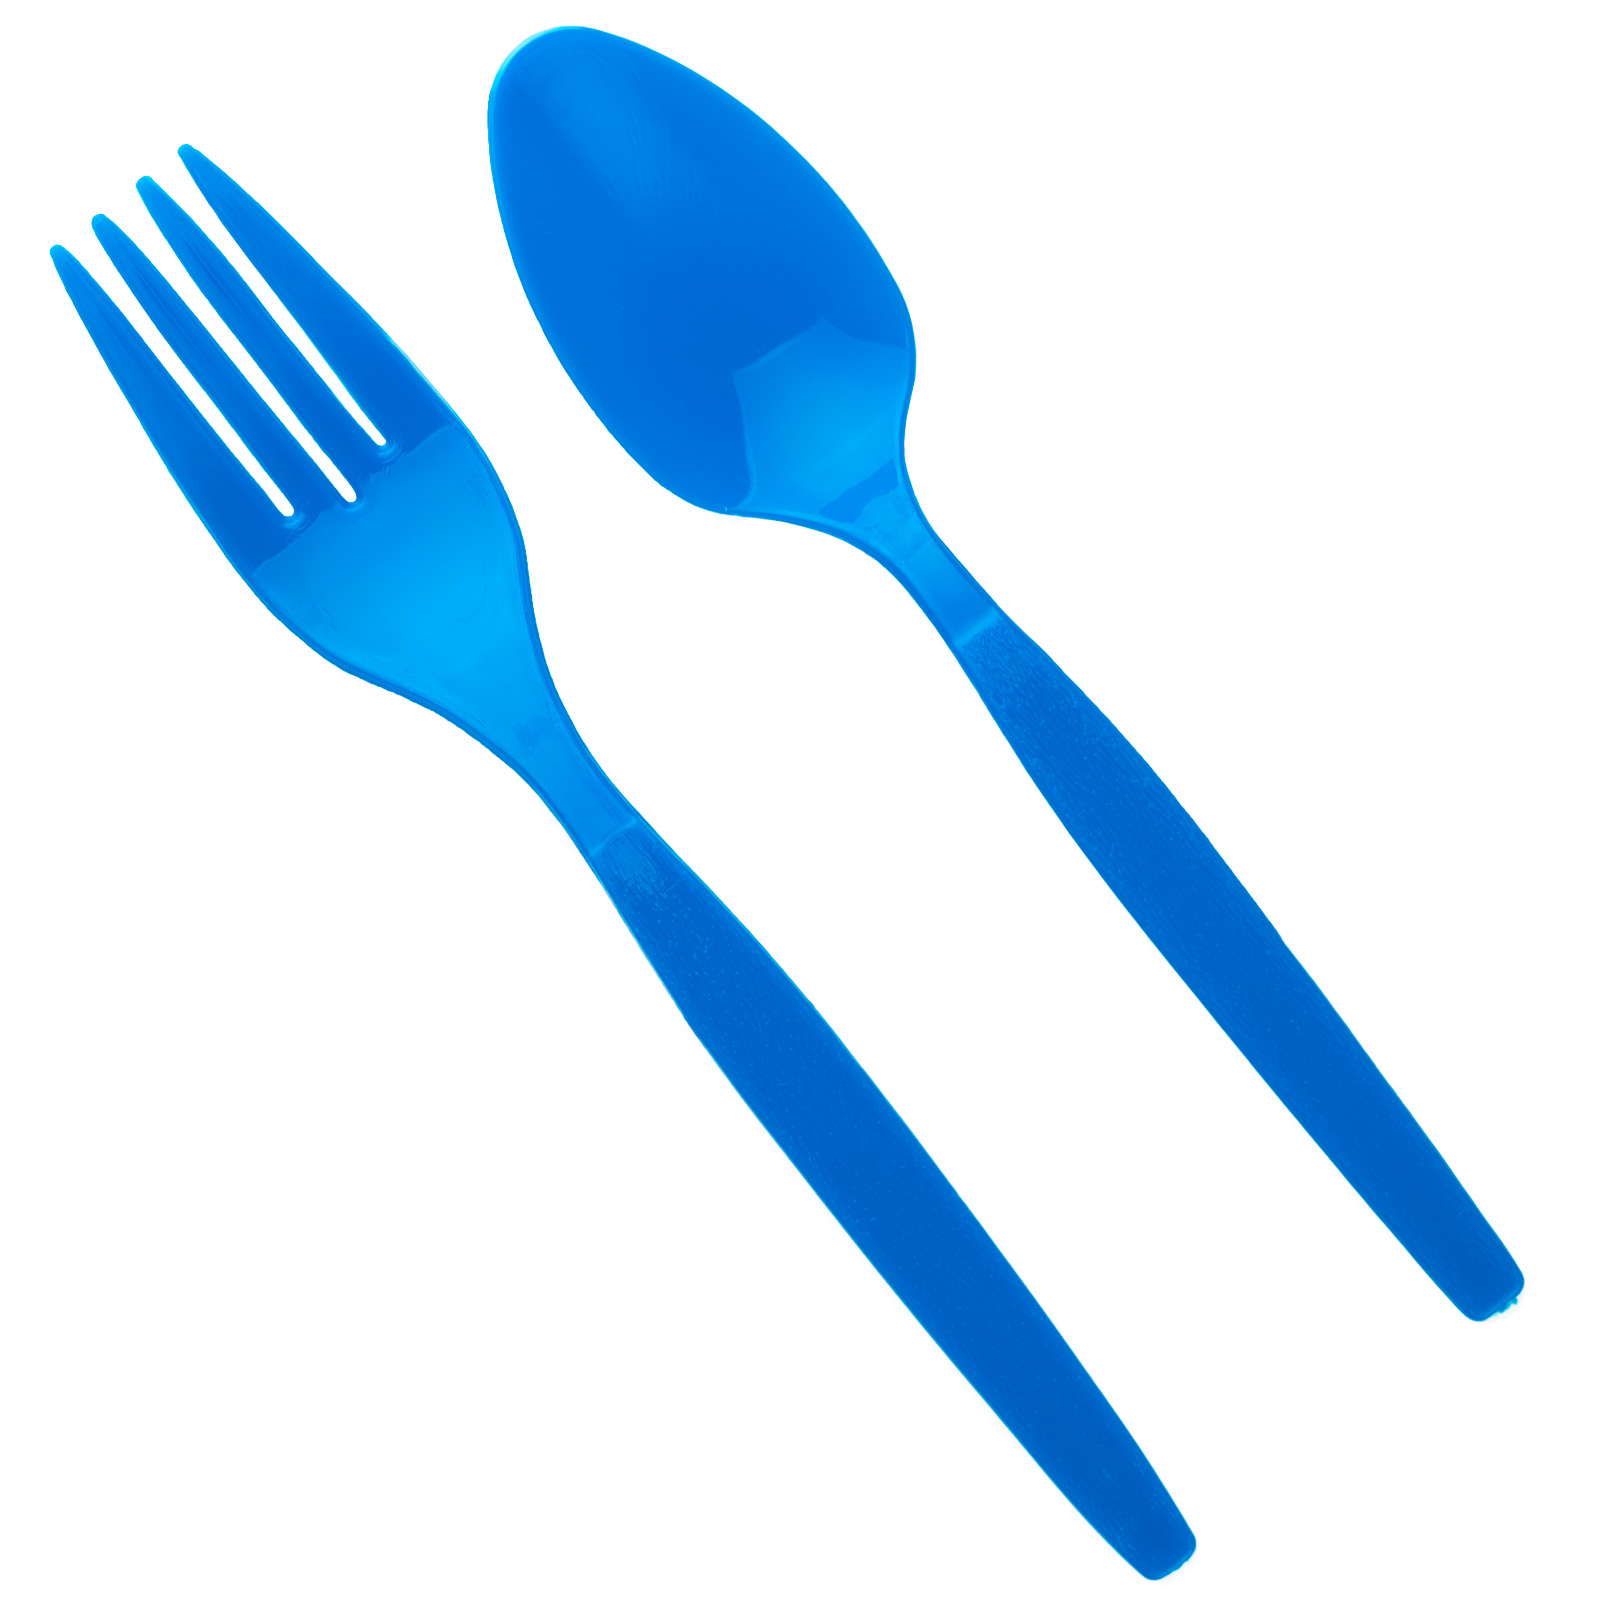 Details about Forks Spoons